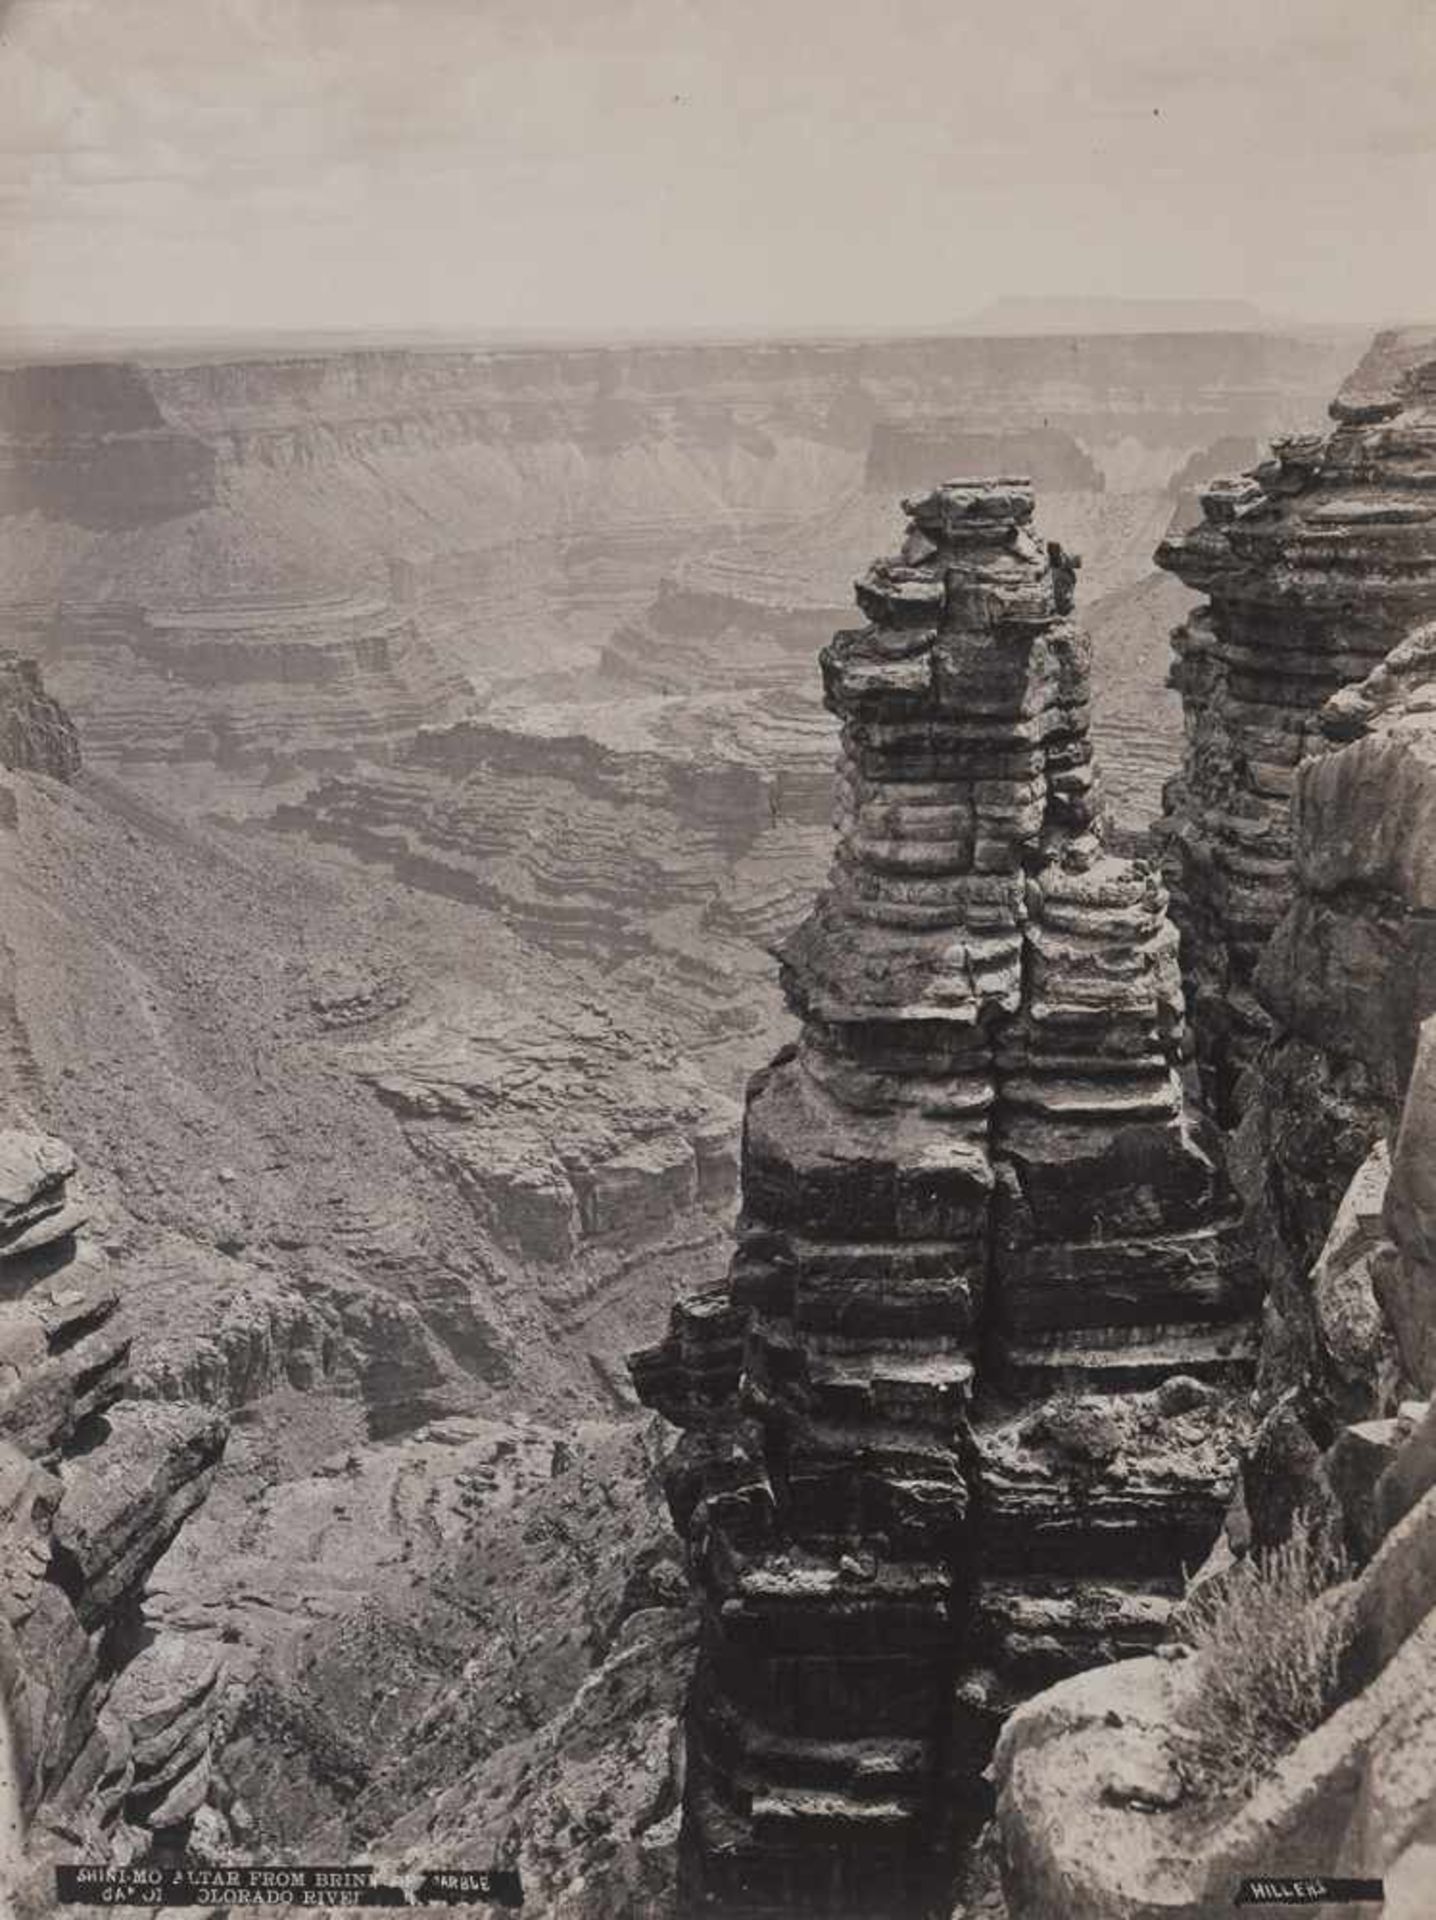 Hillers, John K. and unknown: "Shinimo Altar from Brink of Marble Canyon of the Colorado River, - Image 2 of 3